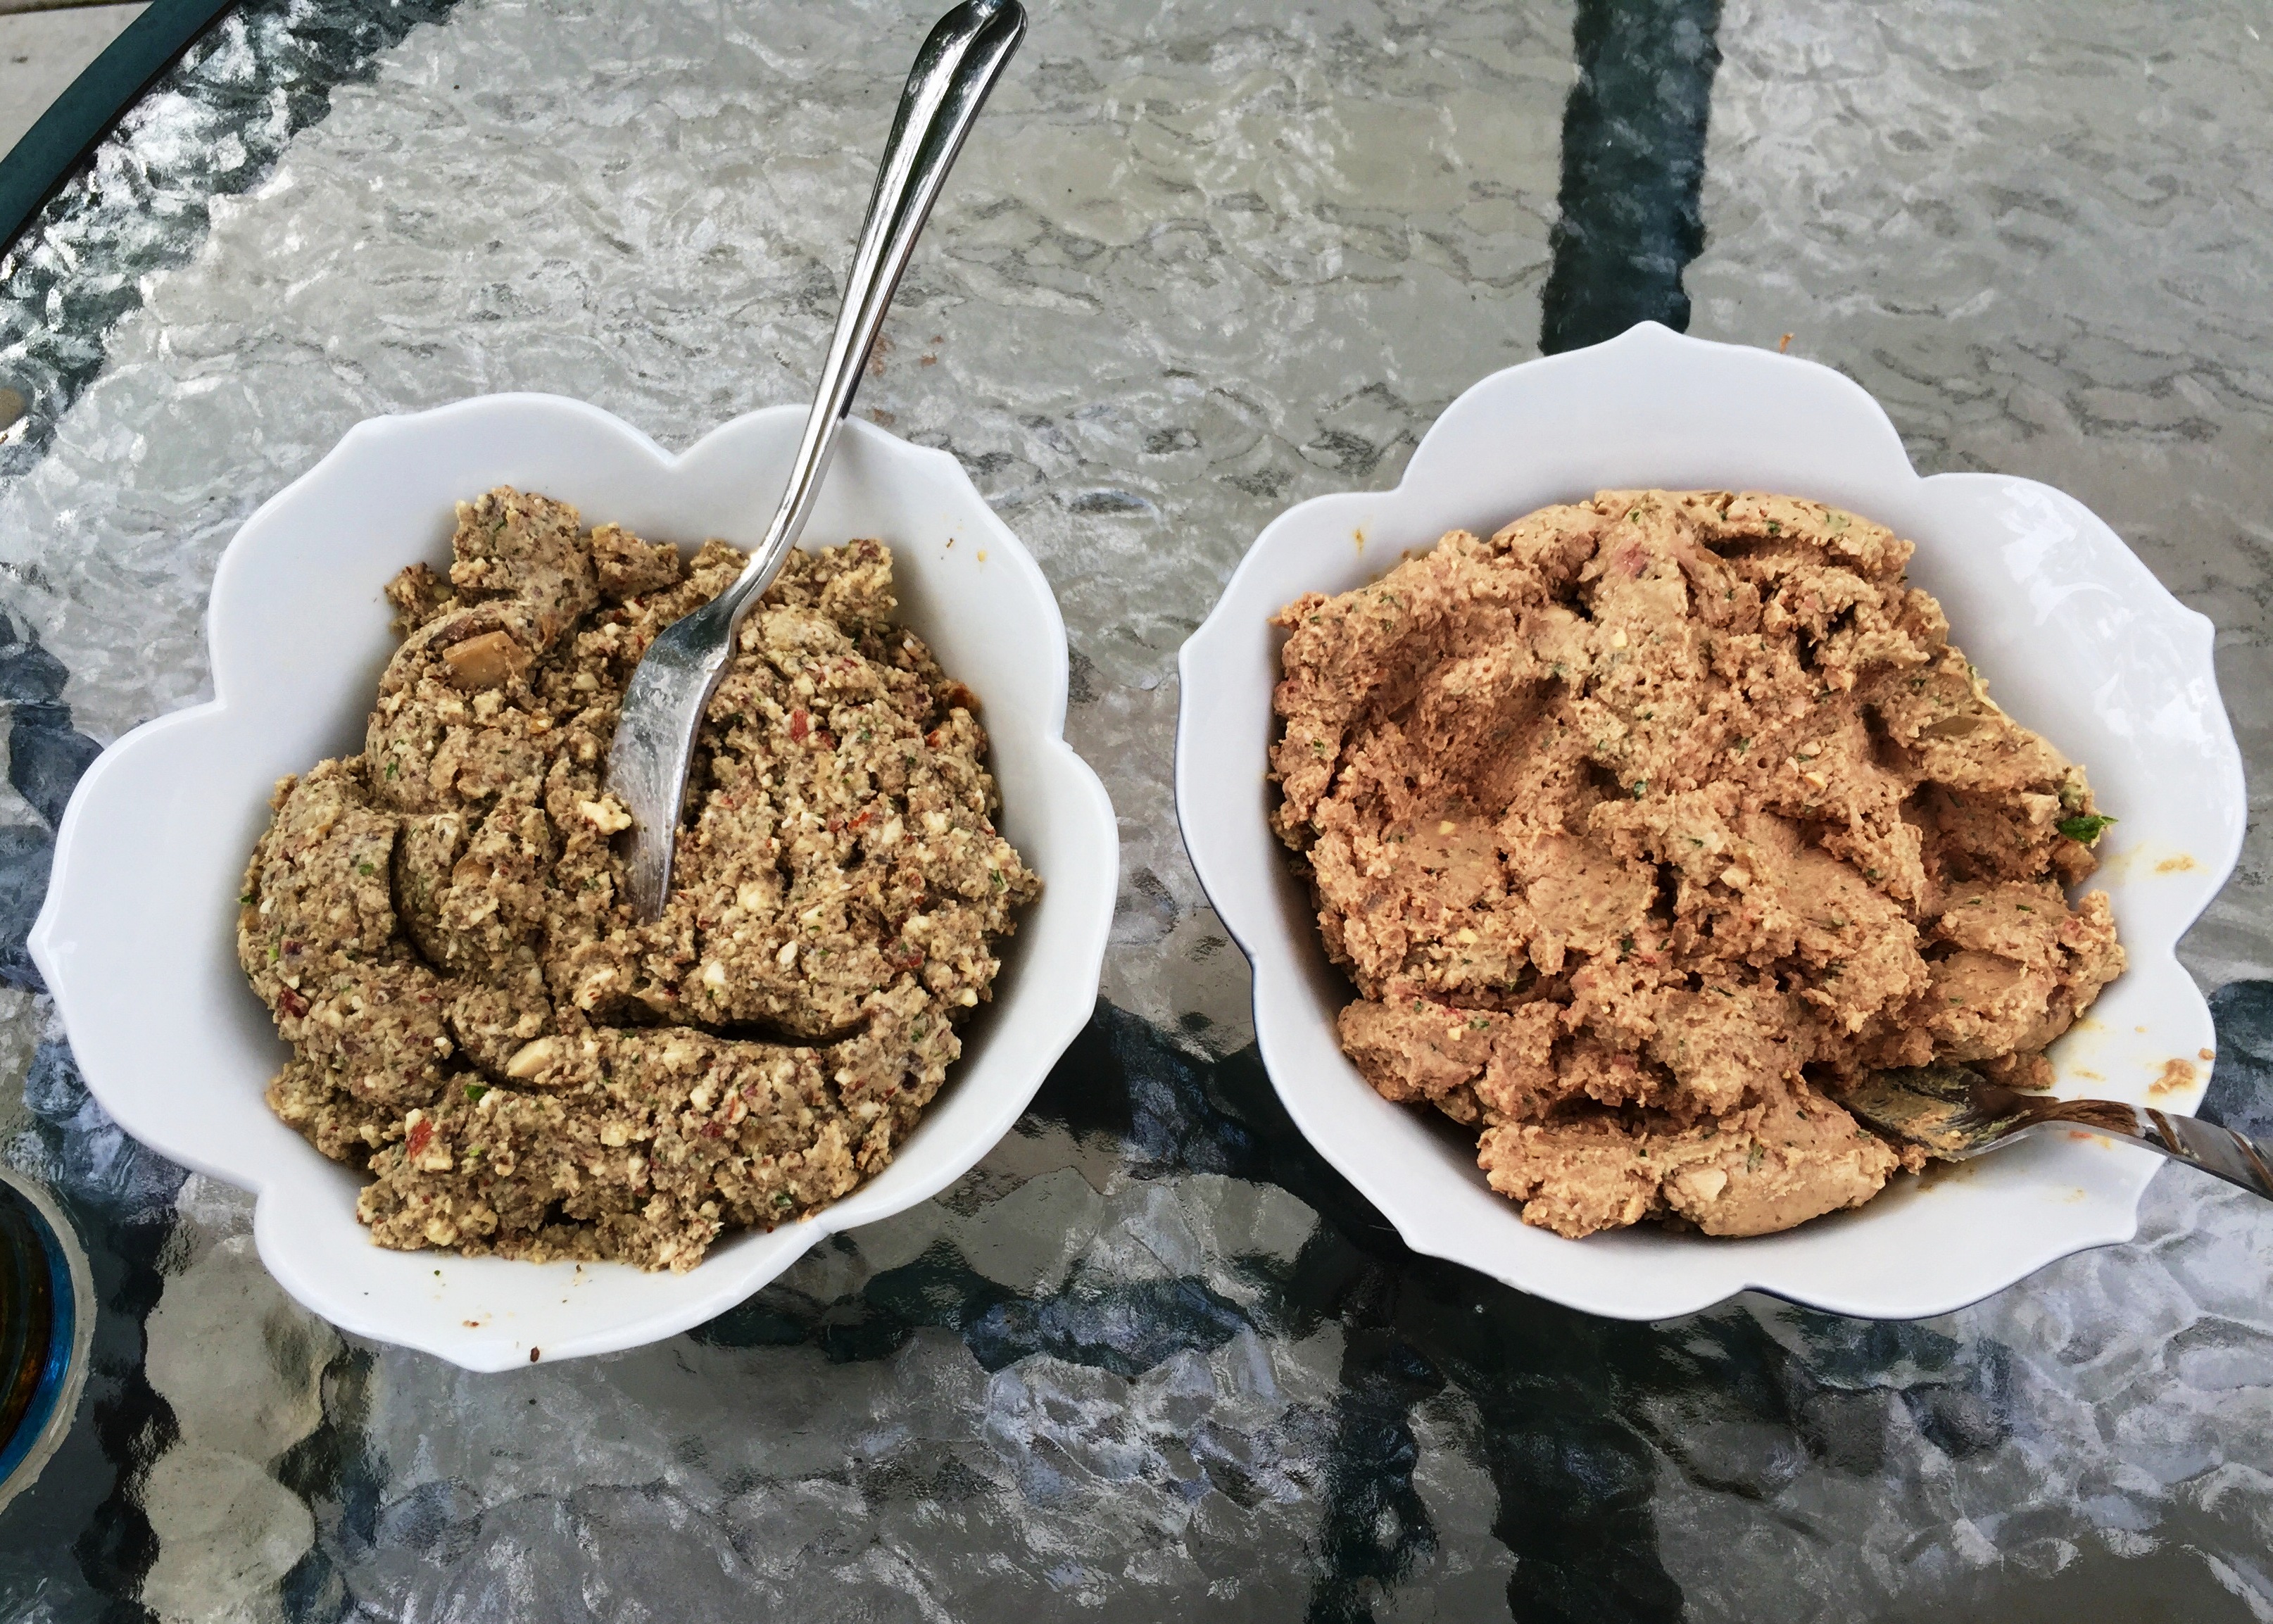 Which is the real chopped liver?.jpg